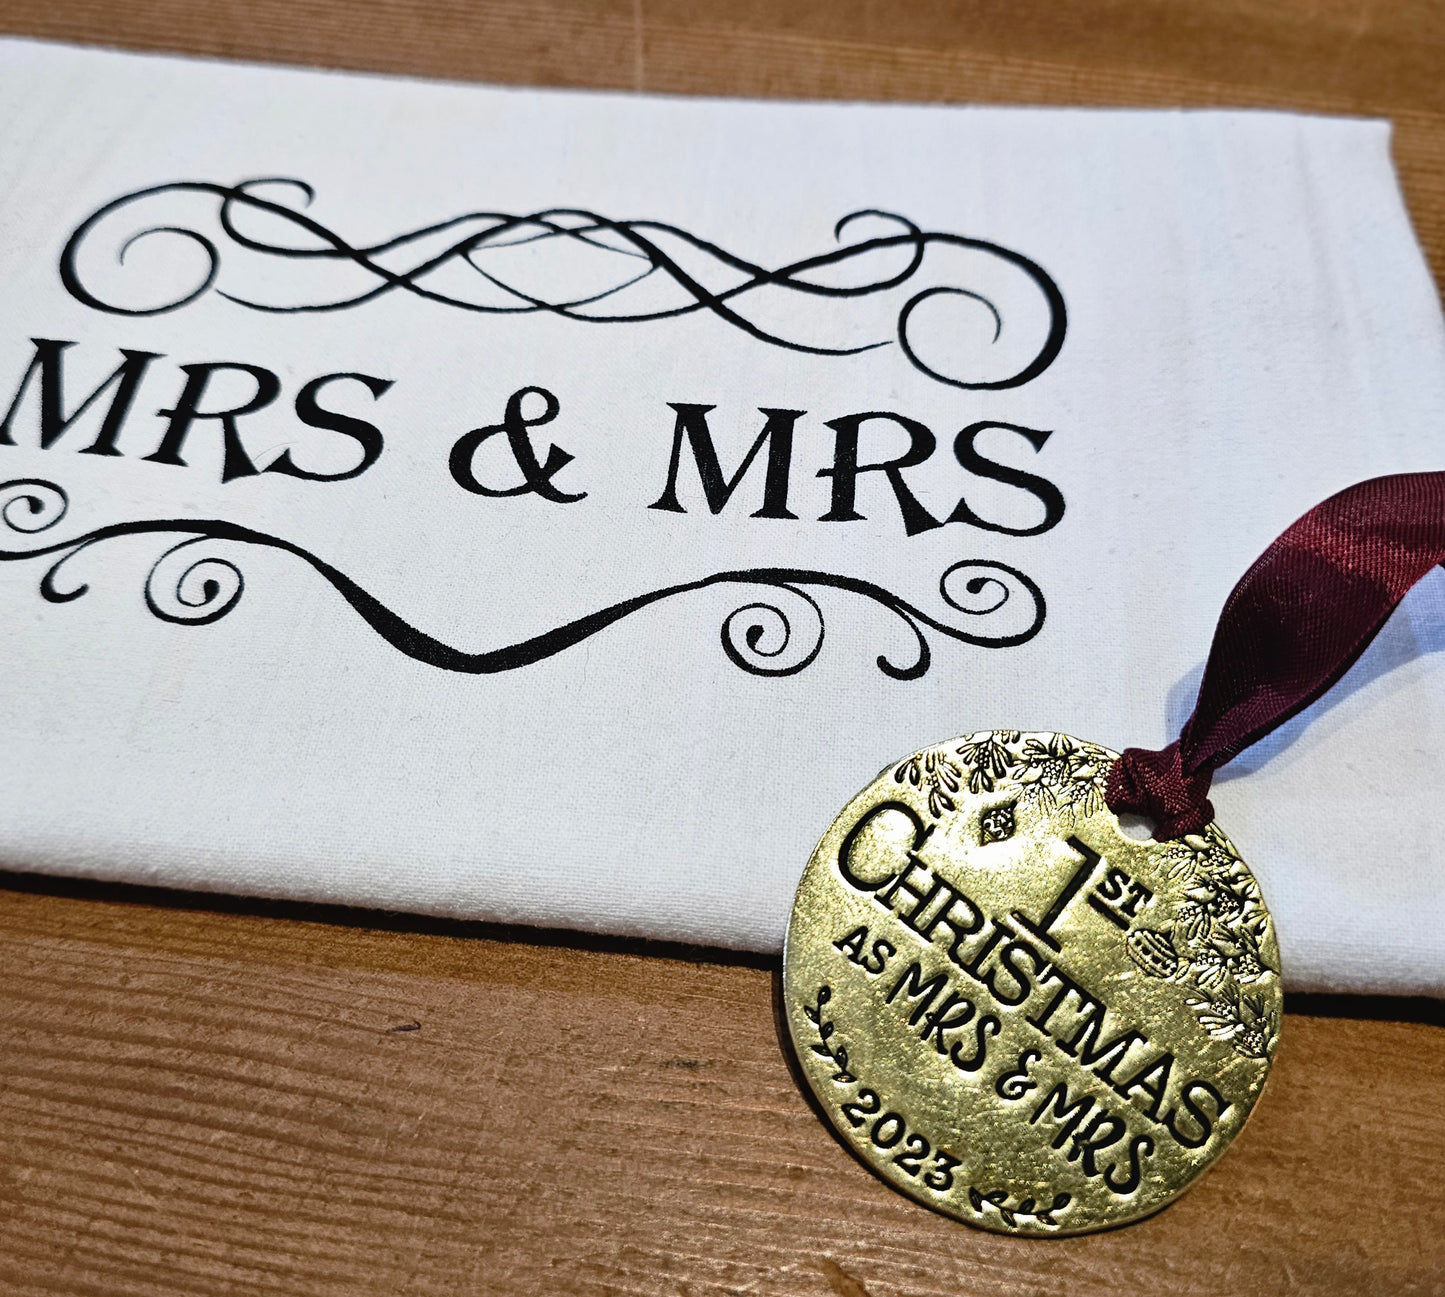 1st Christmas as Mrs. & Mrs. Hand Stamped Brass Ornament